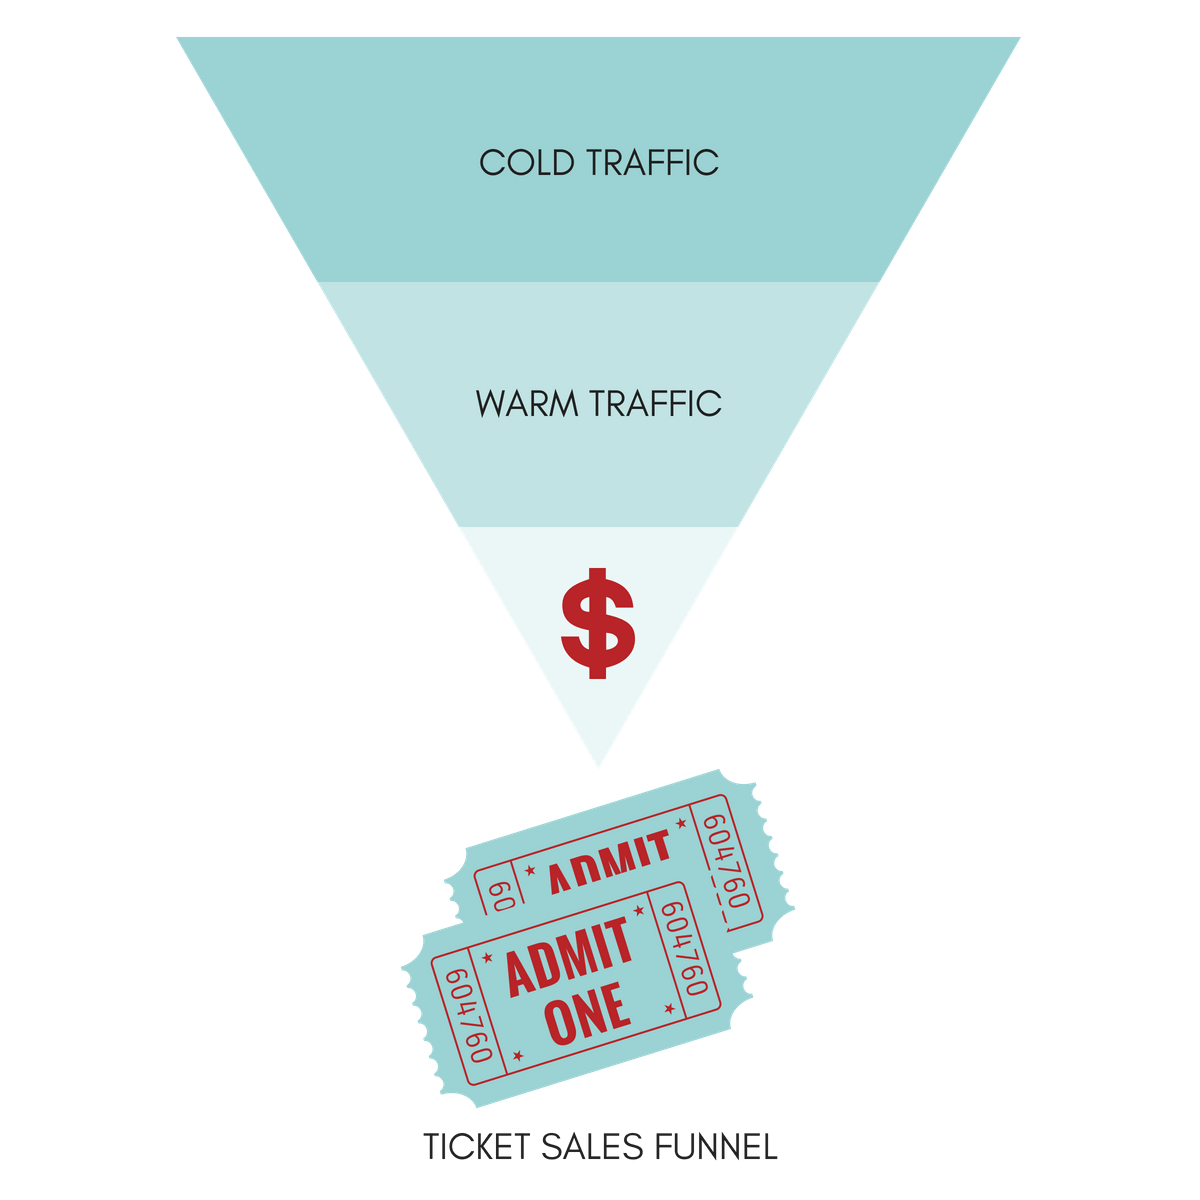 Keep your ticket sales funnel simple.